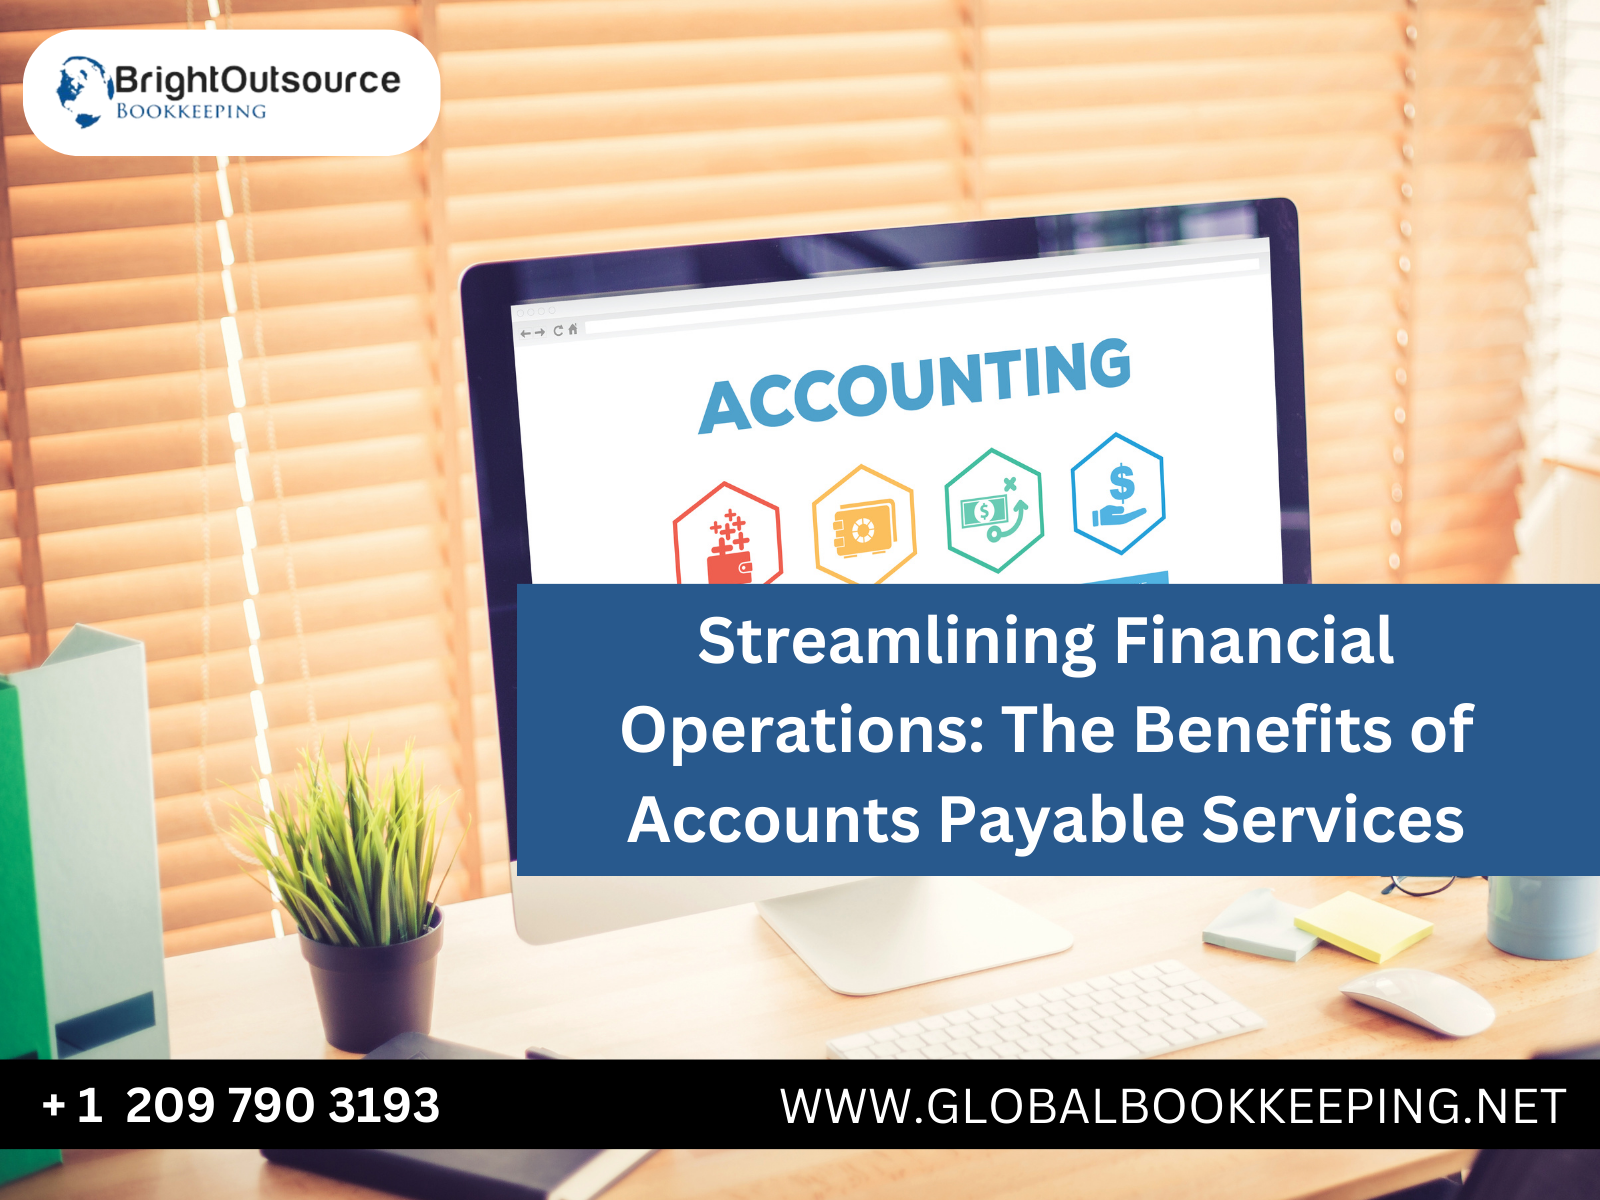 Streamlining Financial Operations: The Benefits of Accounts Payable Services